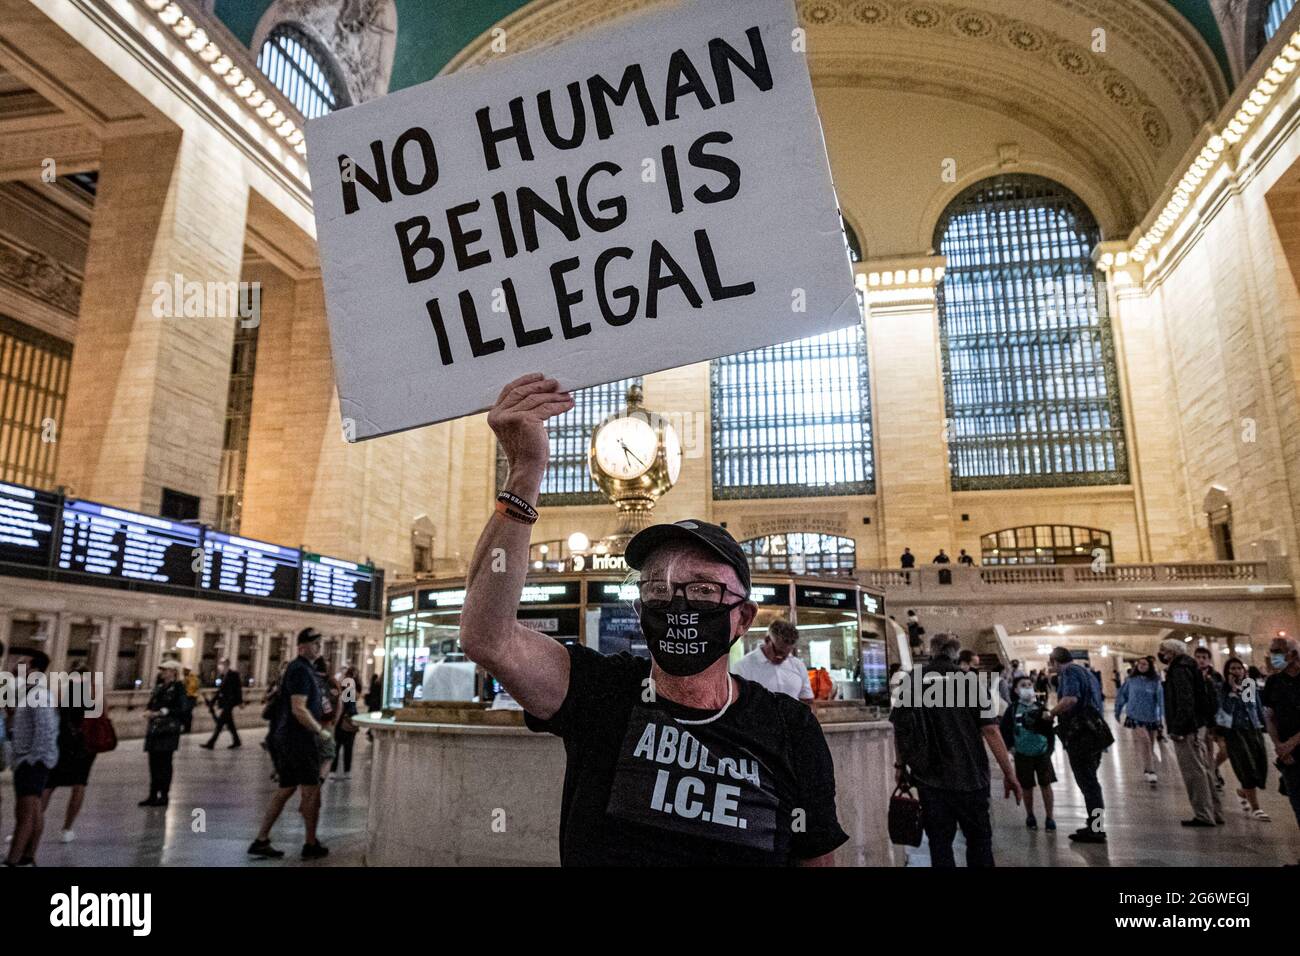 Members of the activist group Rise and Resist gathered on July 8, 2021 at the main hall in Grand Central Station for a protest demanding the Biden administration to permanently end using Title 42 exclusions to detain and deport refugees, to dismantle CBP (Customs and Border Patrol) and ICE (Immigration and Customs Enforcement), and to create a path to citizenship for all. (Photo by Erik McGregor/Sipa USA) Stock Photo